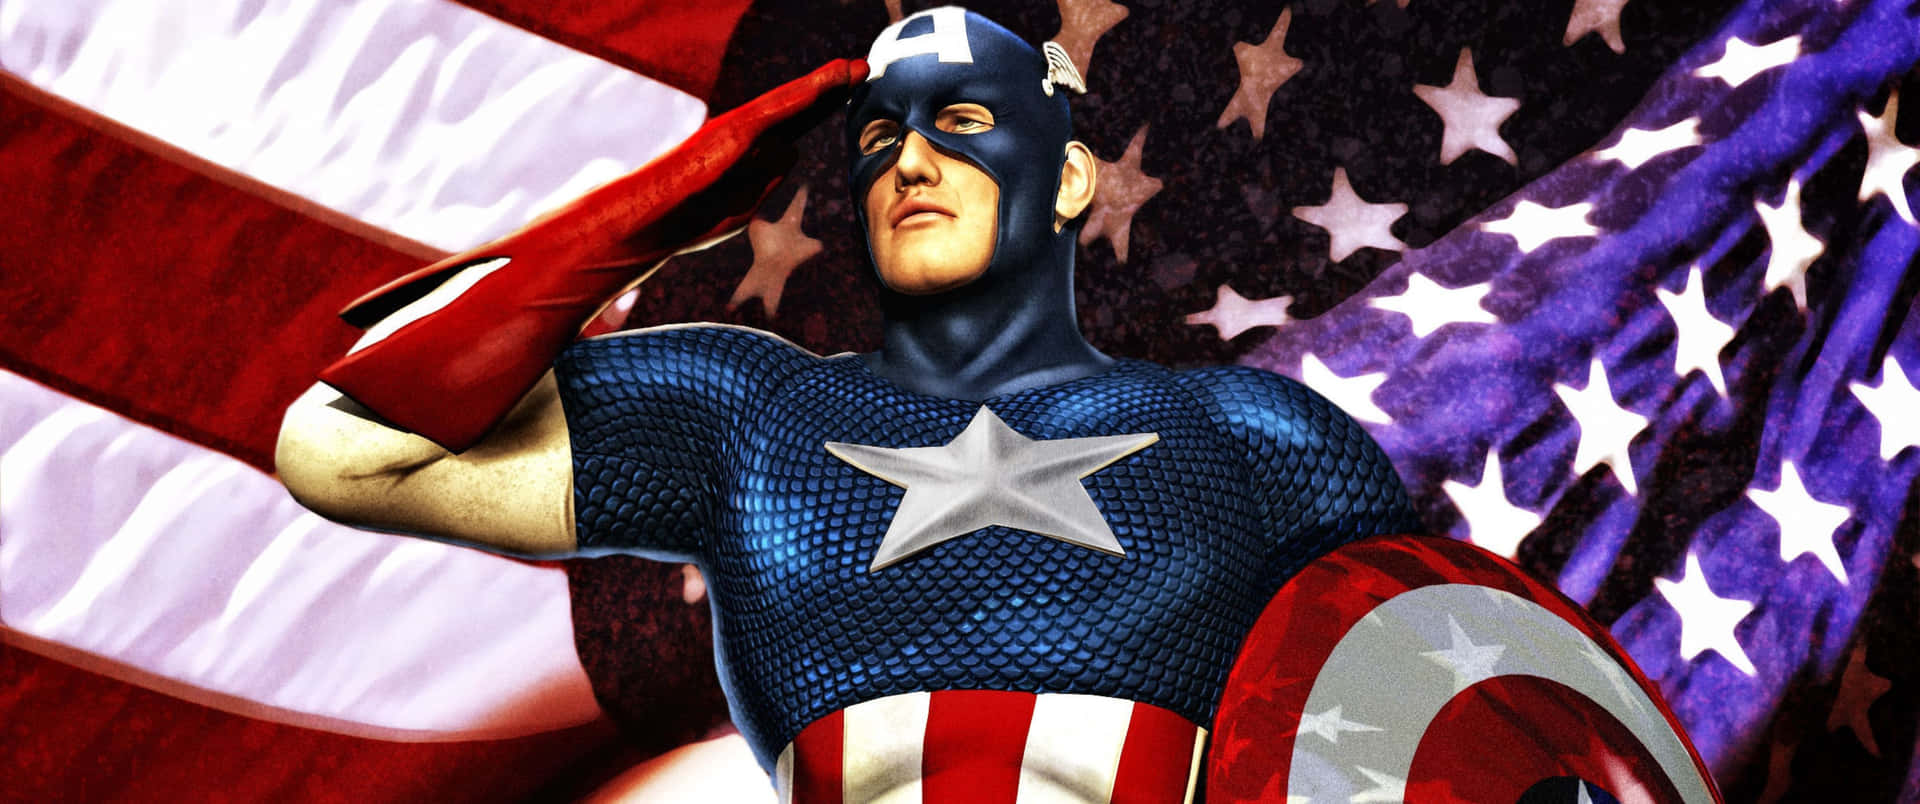 "Captain America, a symbol of justice and freedom!"